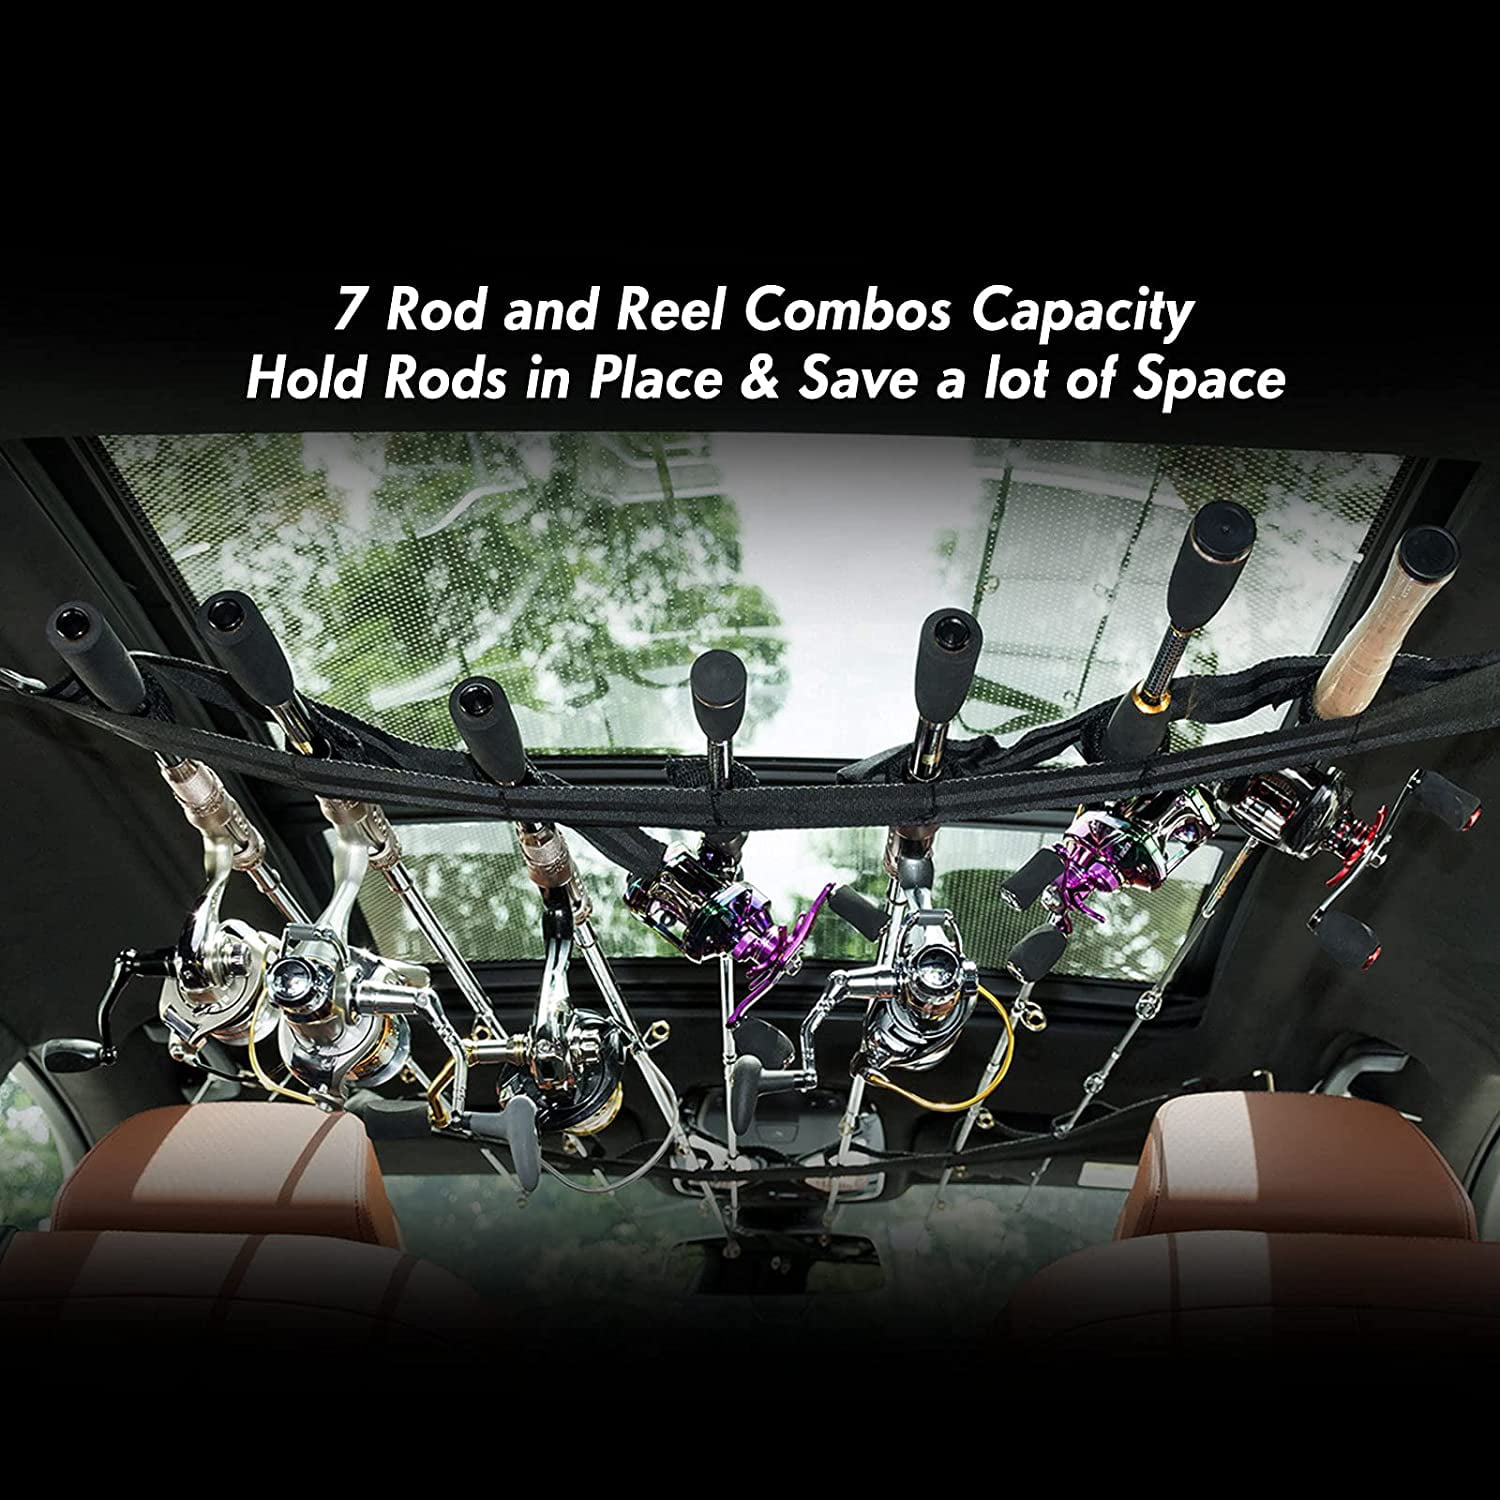 2X Fishing Car OrganizerS Rod Holder Belts Rod Fixed Strap Carrier